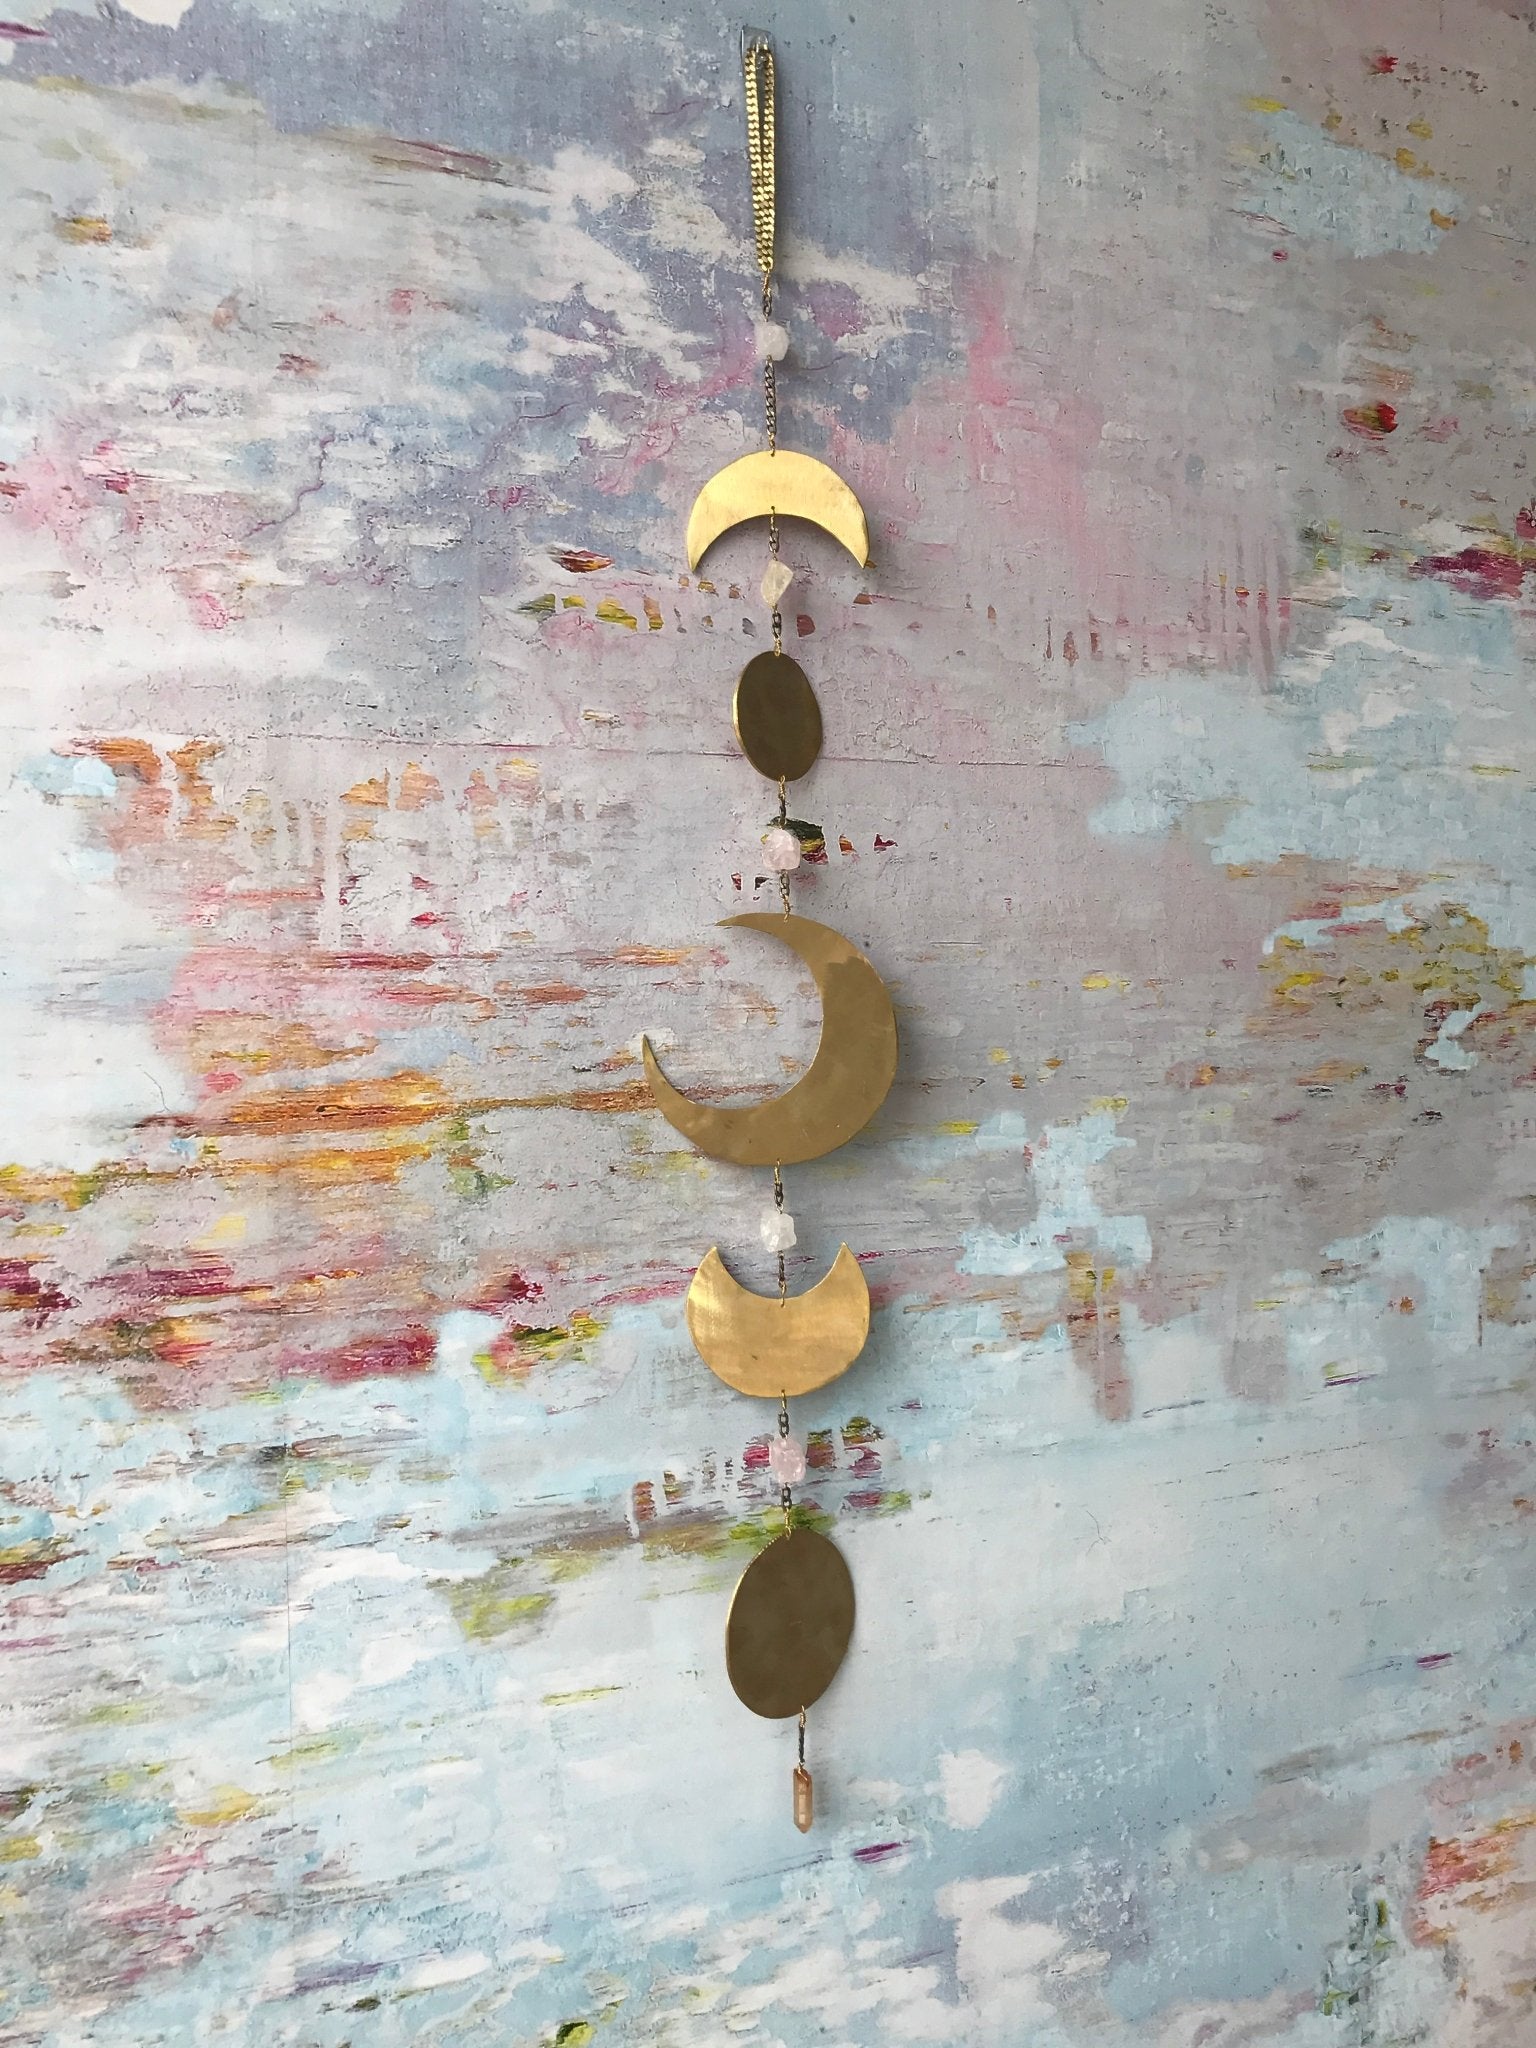 Moon Phase Wall Hanging - Ariana Ost